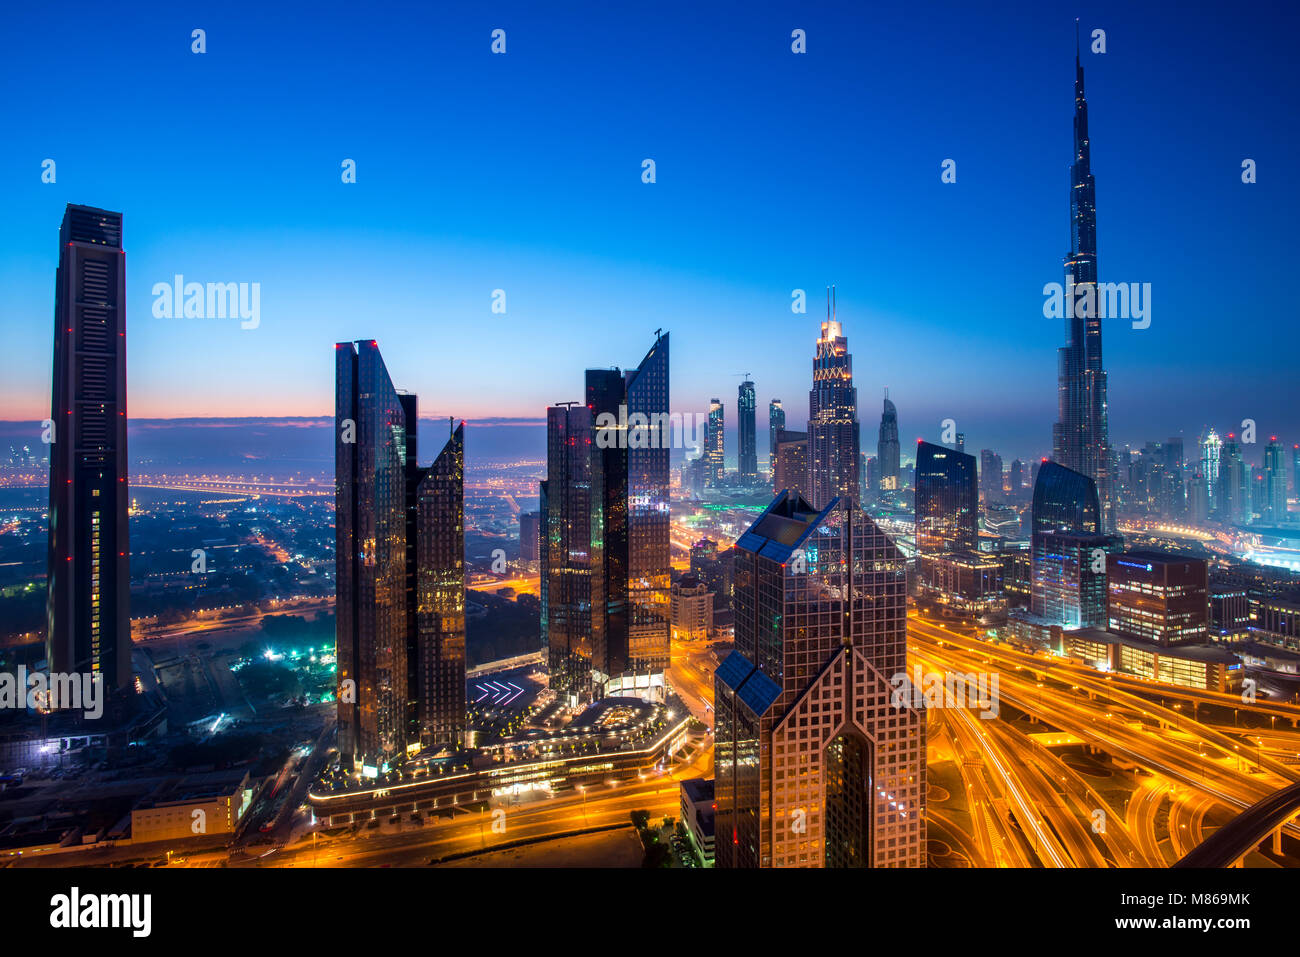 Cityscapes by day and night, featuring Singapore or Dubai.  For Singapore, featuring Marina Bay Sands by the Harbour. Dubai features downtown Dubai. Stock Photo